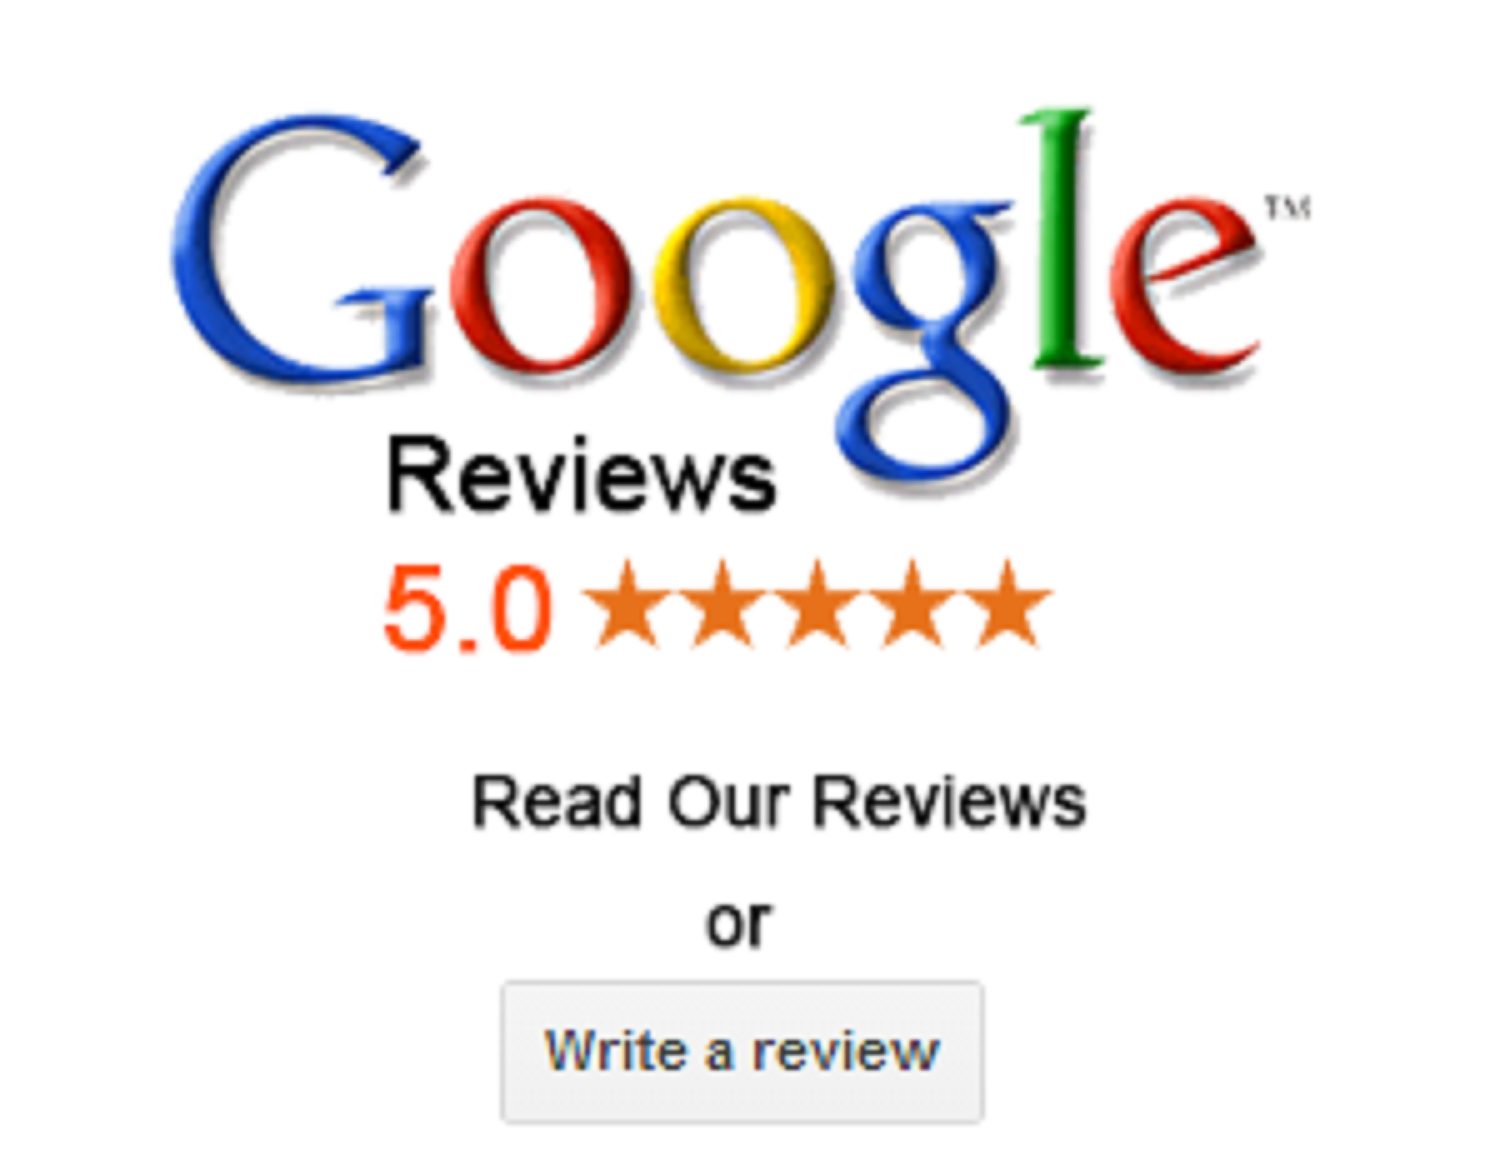 Get 3 Spectacular Google Reviews +1 FREE That STICKS From Real Humans